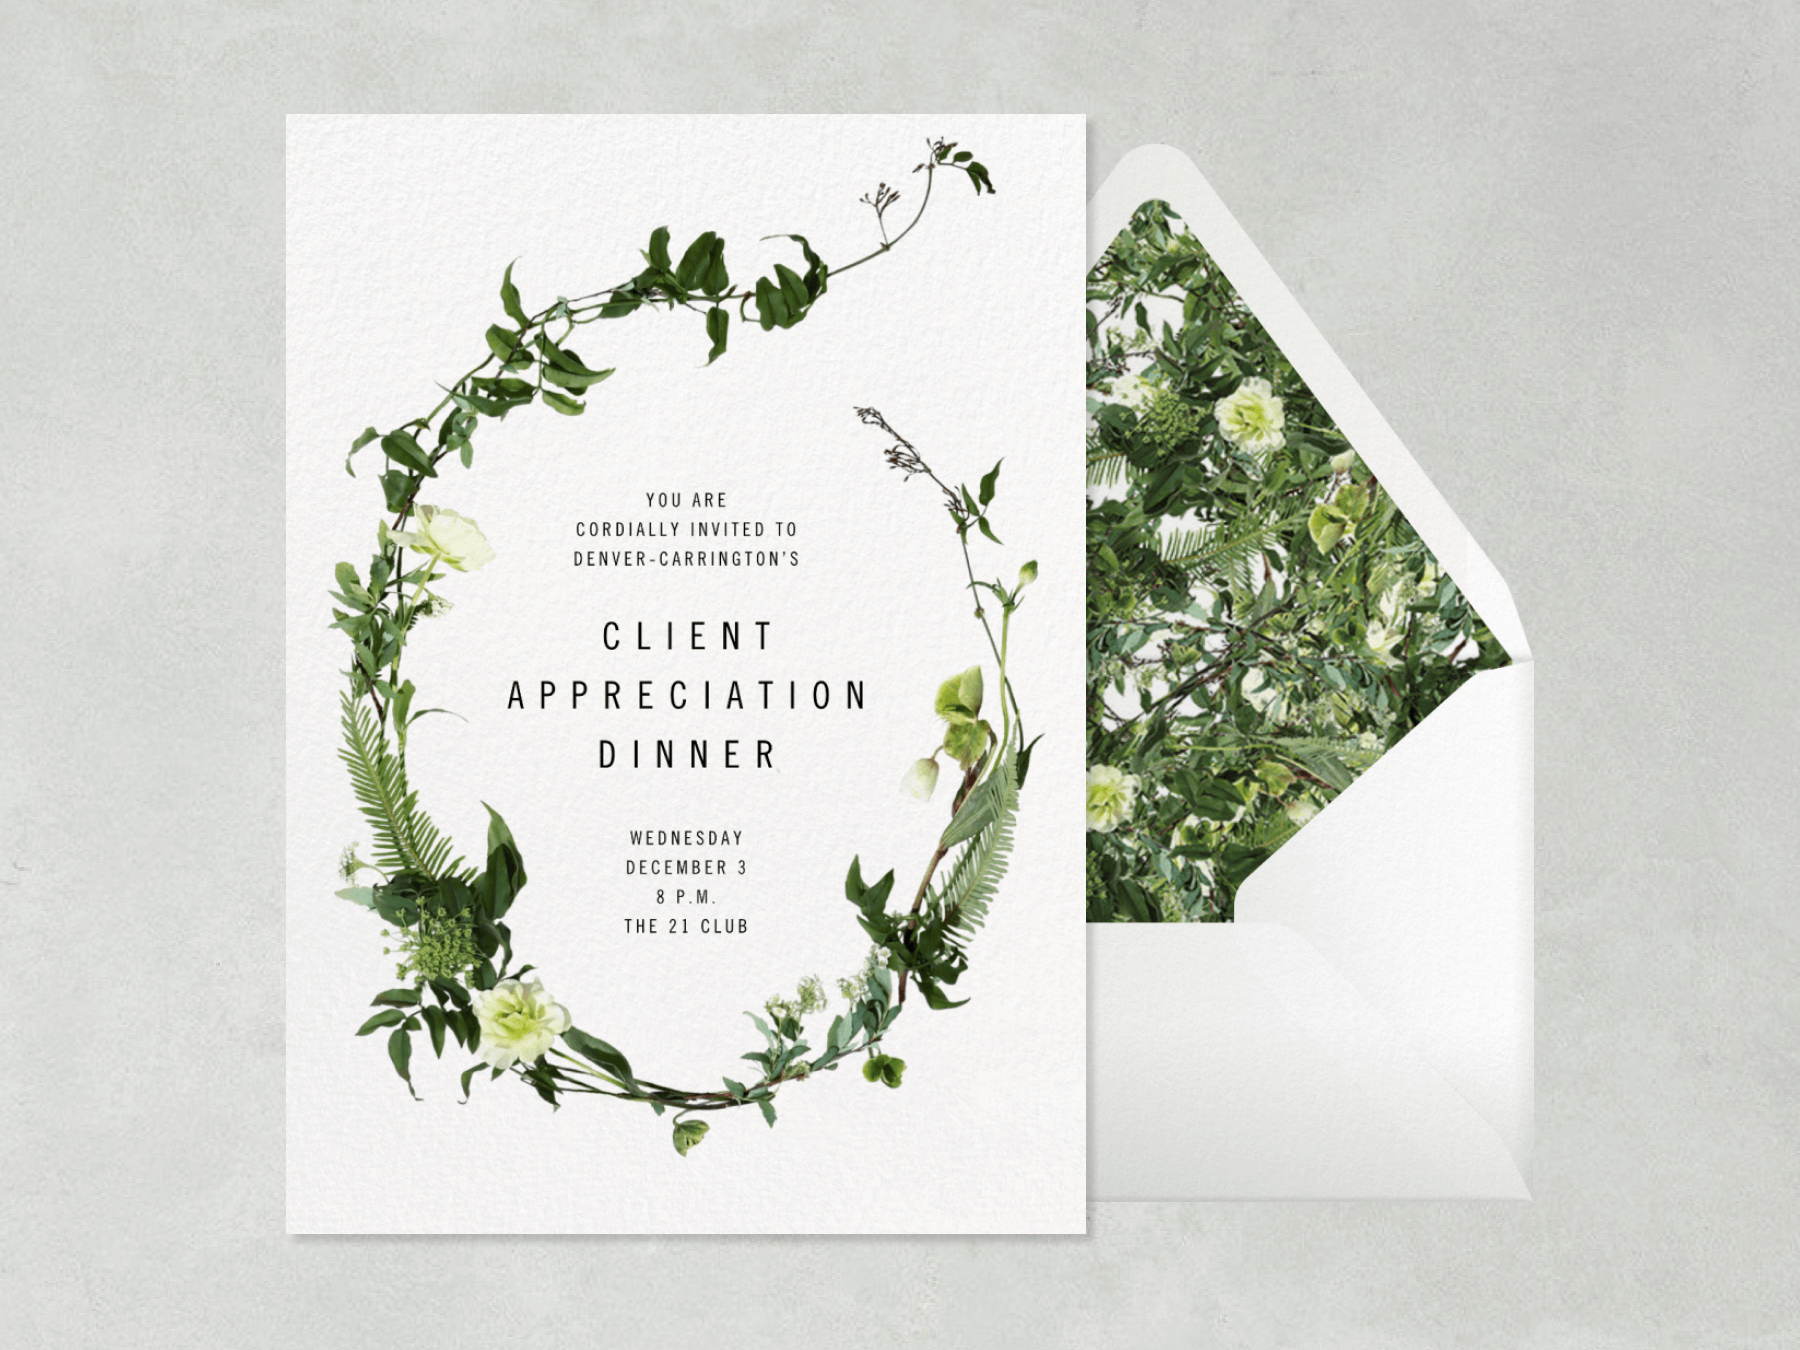 A Client Appreciation Dinner invitation with a green vine and leaves in a wild oval shape, beside a white envelope with matching greenery liner.